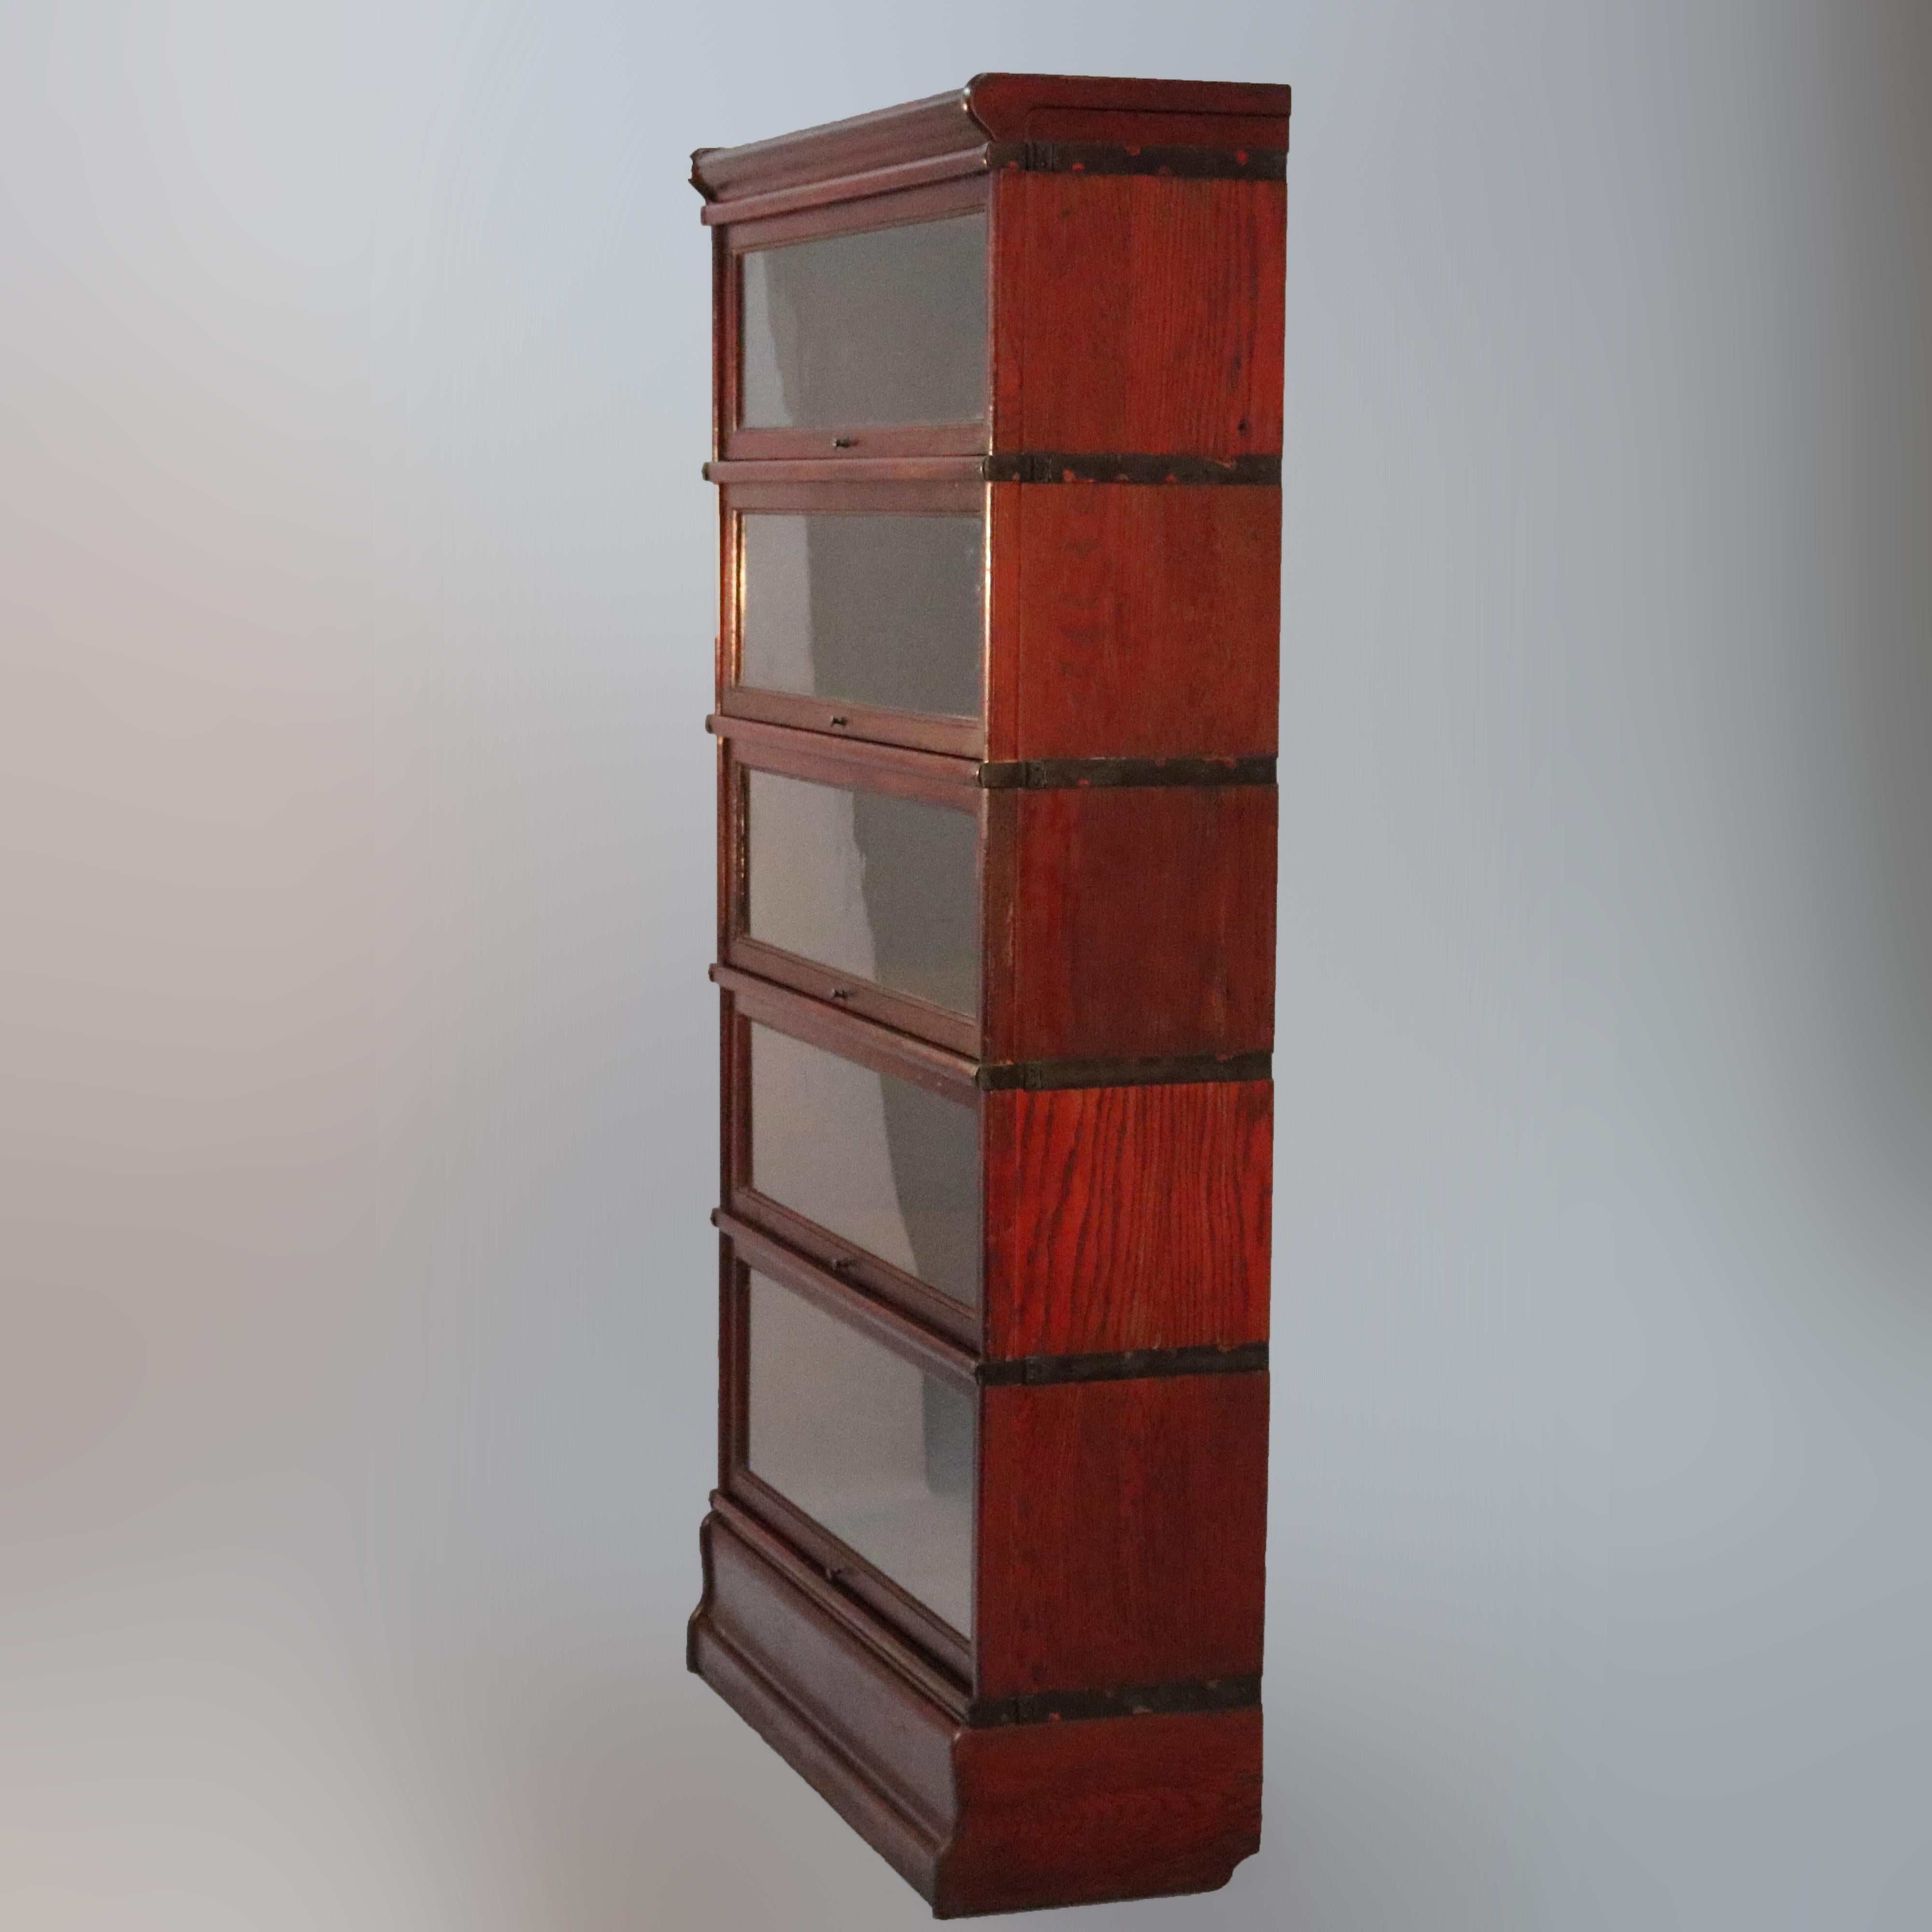 An antique Arts & Crafts Barrister bookcase by Globe Wernicke offers oak construction with five stacks having pullout / pull-out glass doors, original labels as photographed, circa 1910

Measures: 64.75